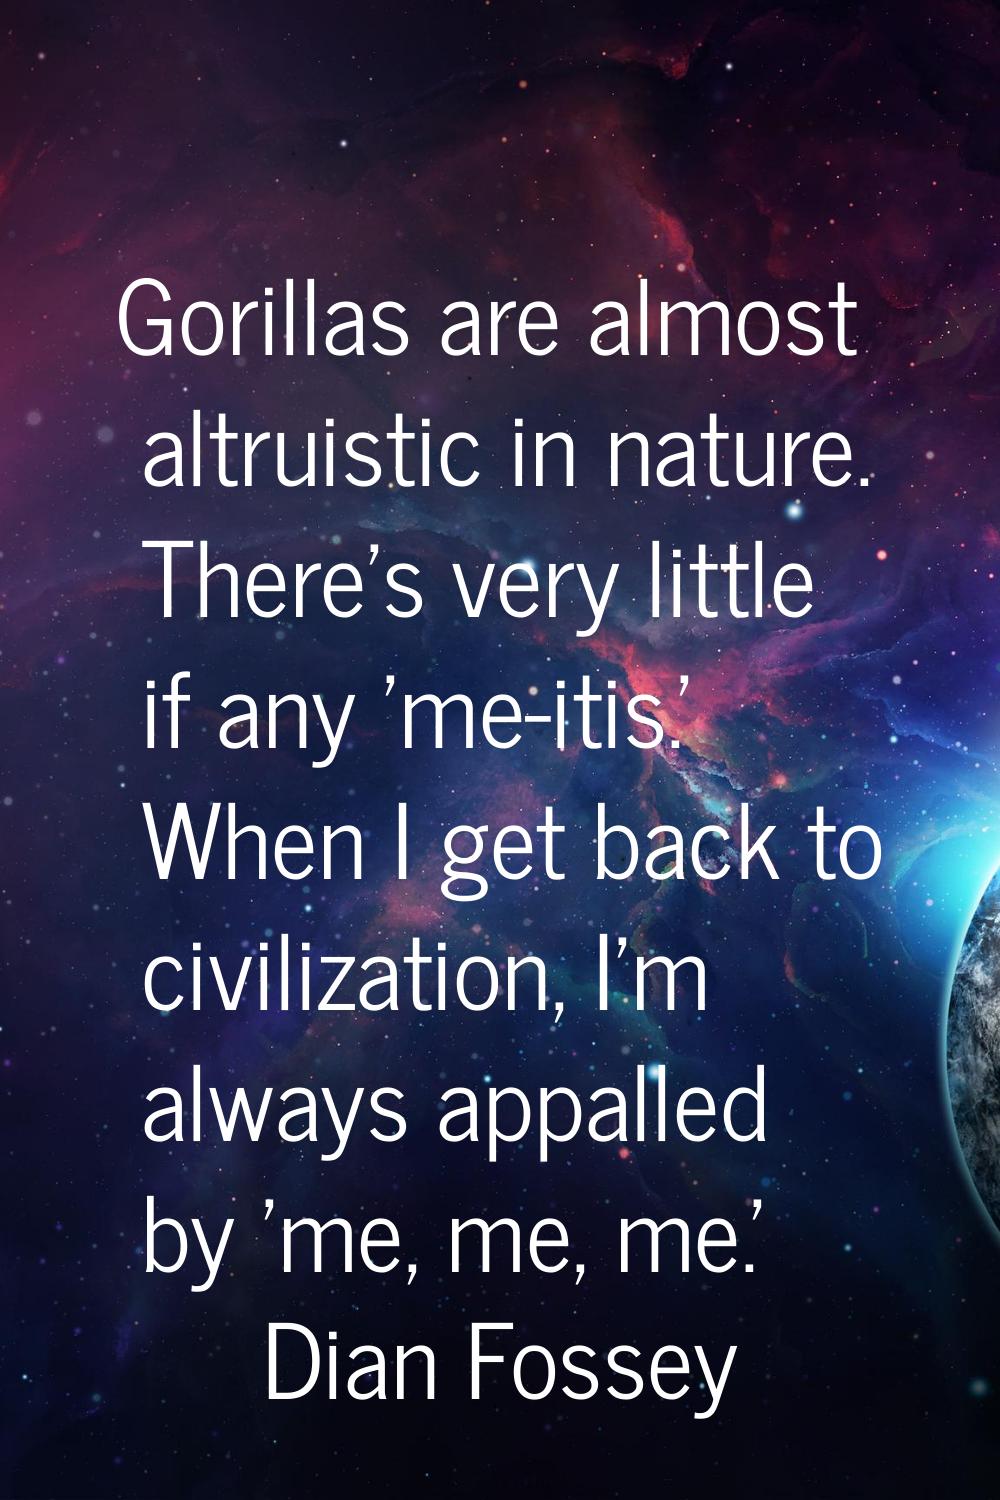 Gorillas are almost altruistic in nature. There's very little if any 'me-itis.' When I get back to 